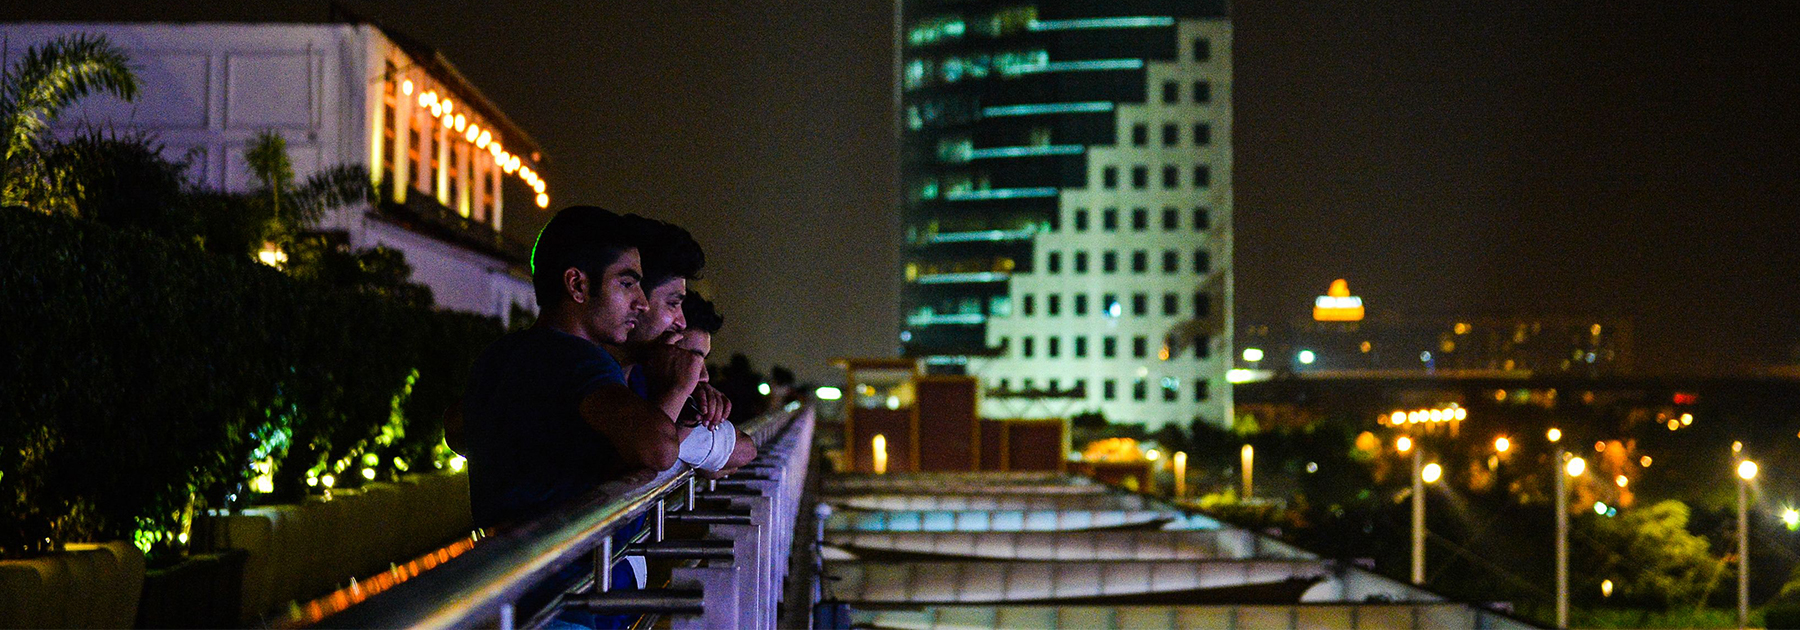 People look over a mall in the DLF Cyber City area of Gurgaon. (CHANDAN KHANNA/AFP/Getty Images)